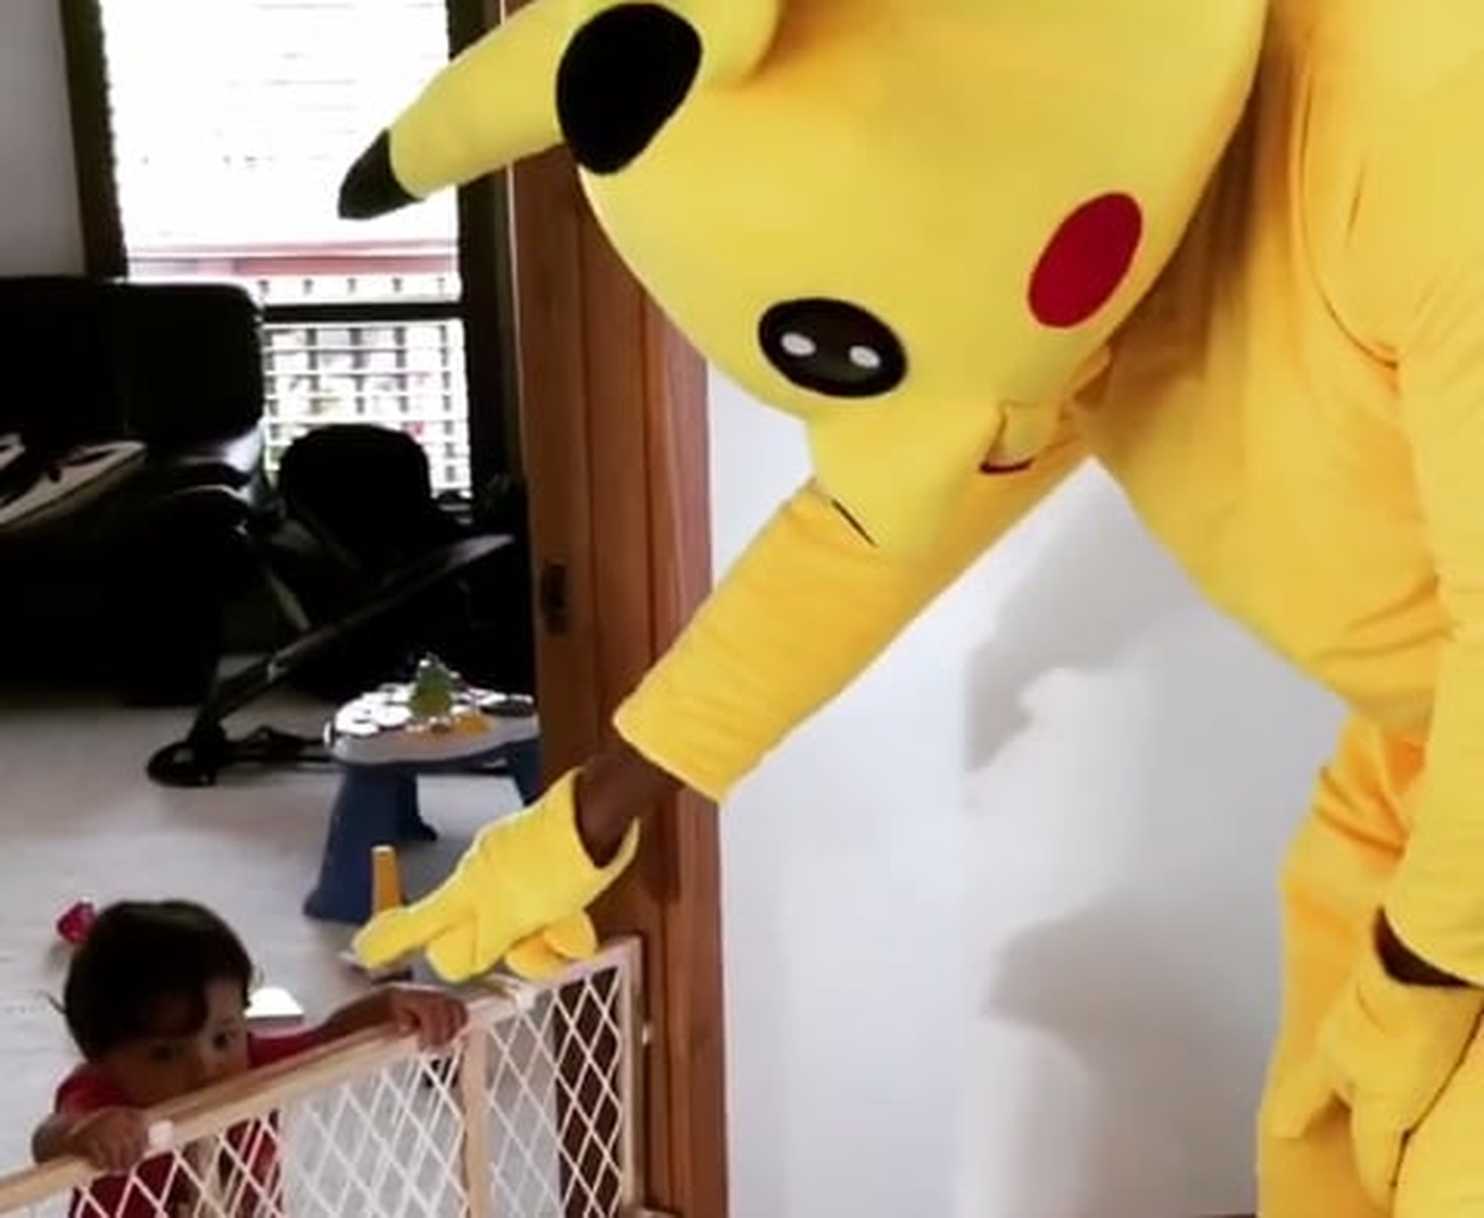 Dwayne Johnson is a giant Pikachu who must dance for his baby daughter